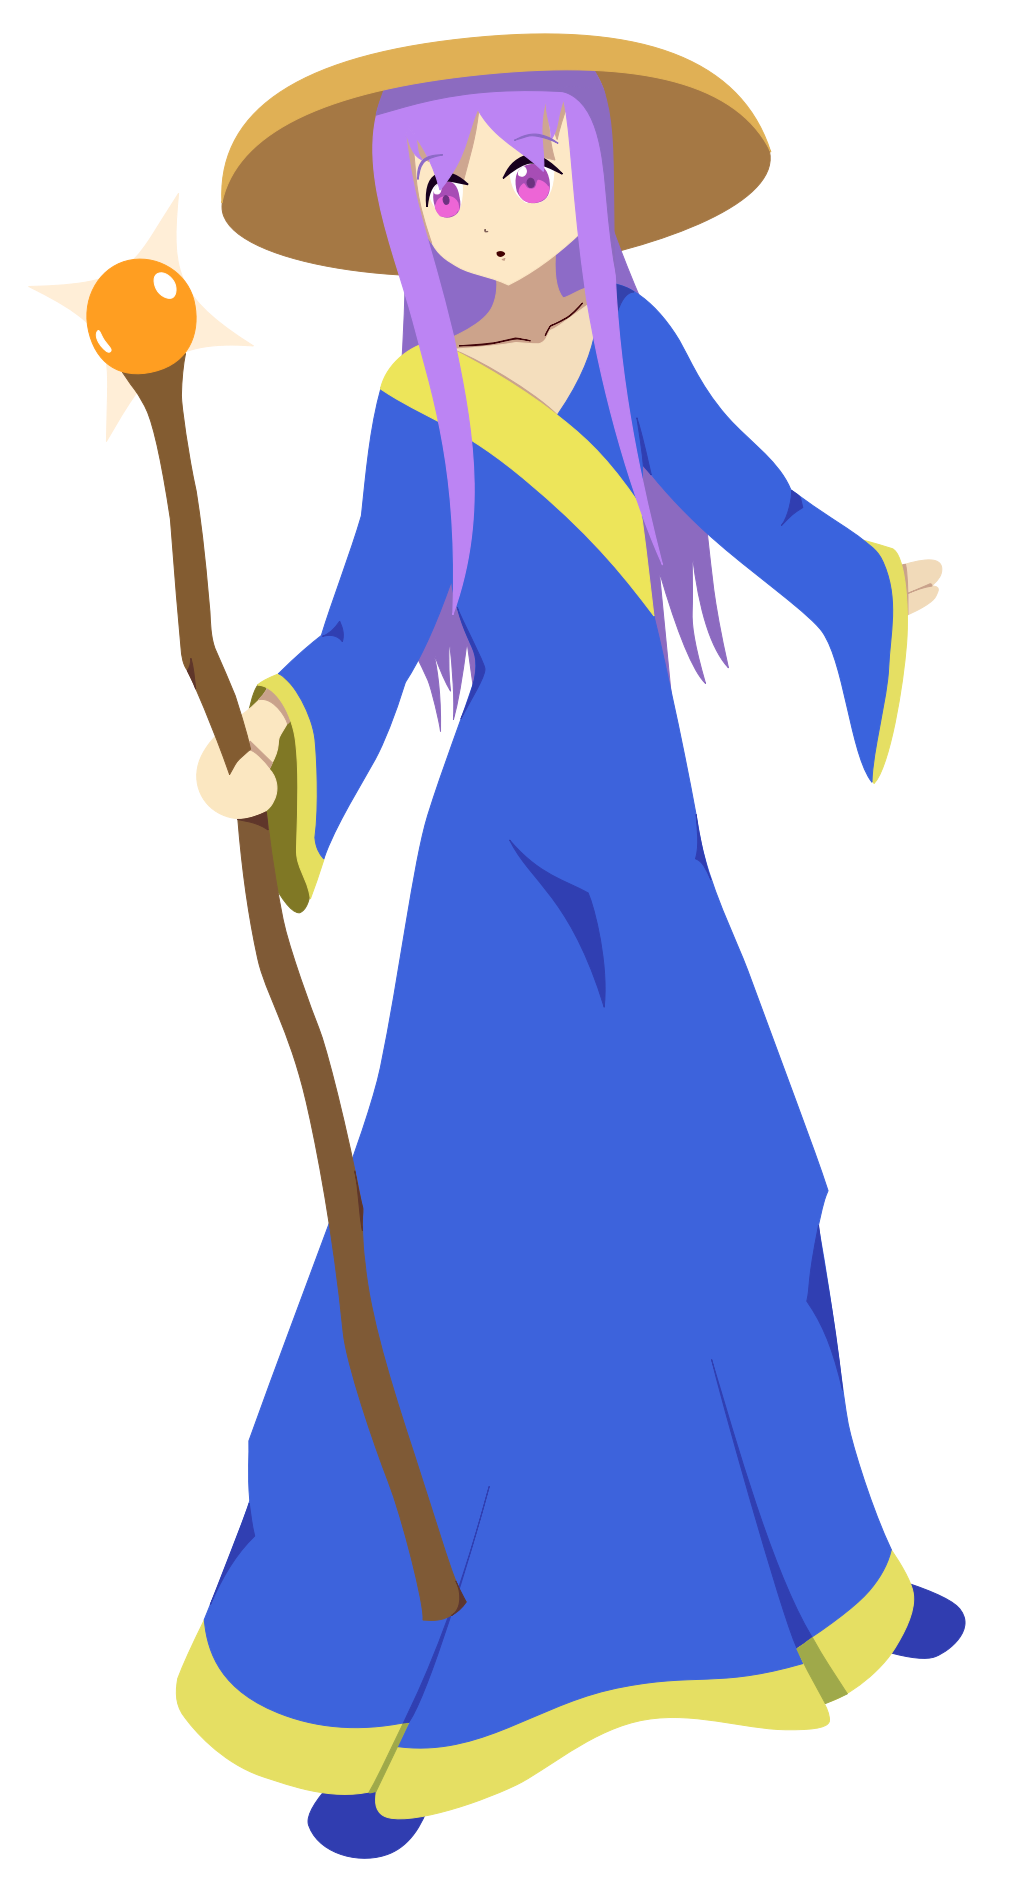 A woman in long, blue robes with purple hair, wearing a circular religious hat. In her hand is a staff with a glowing orange orb on the end.